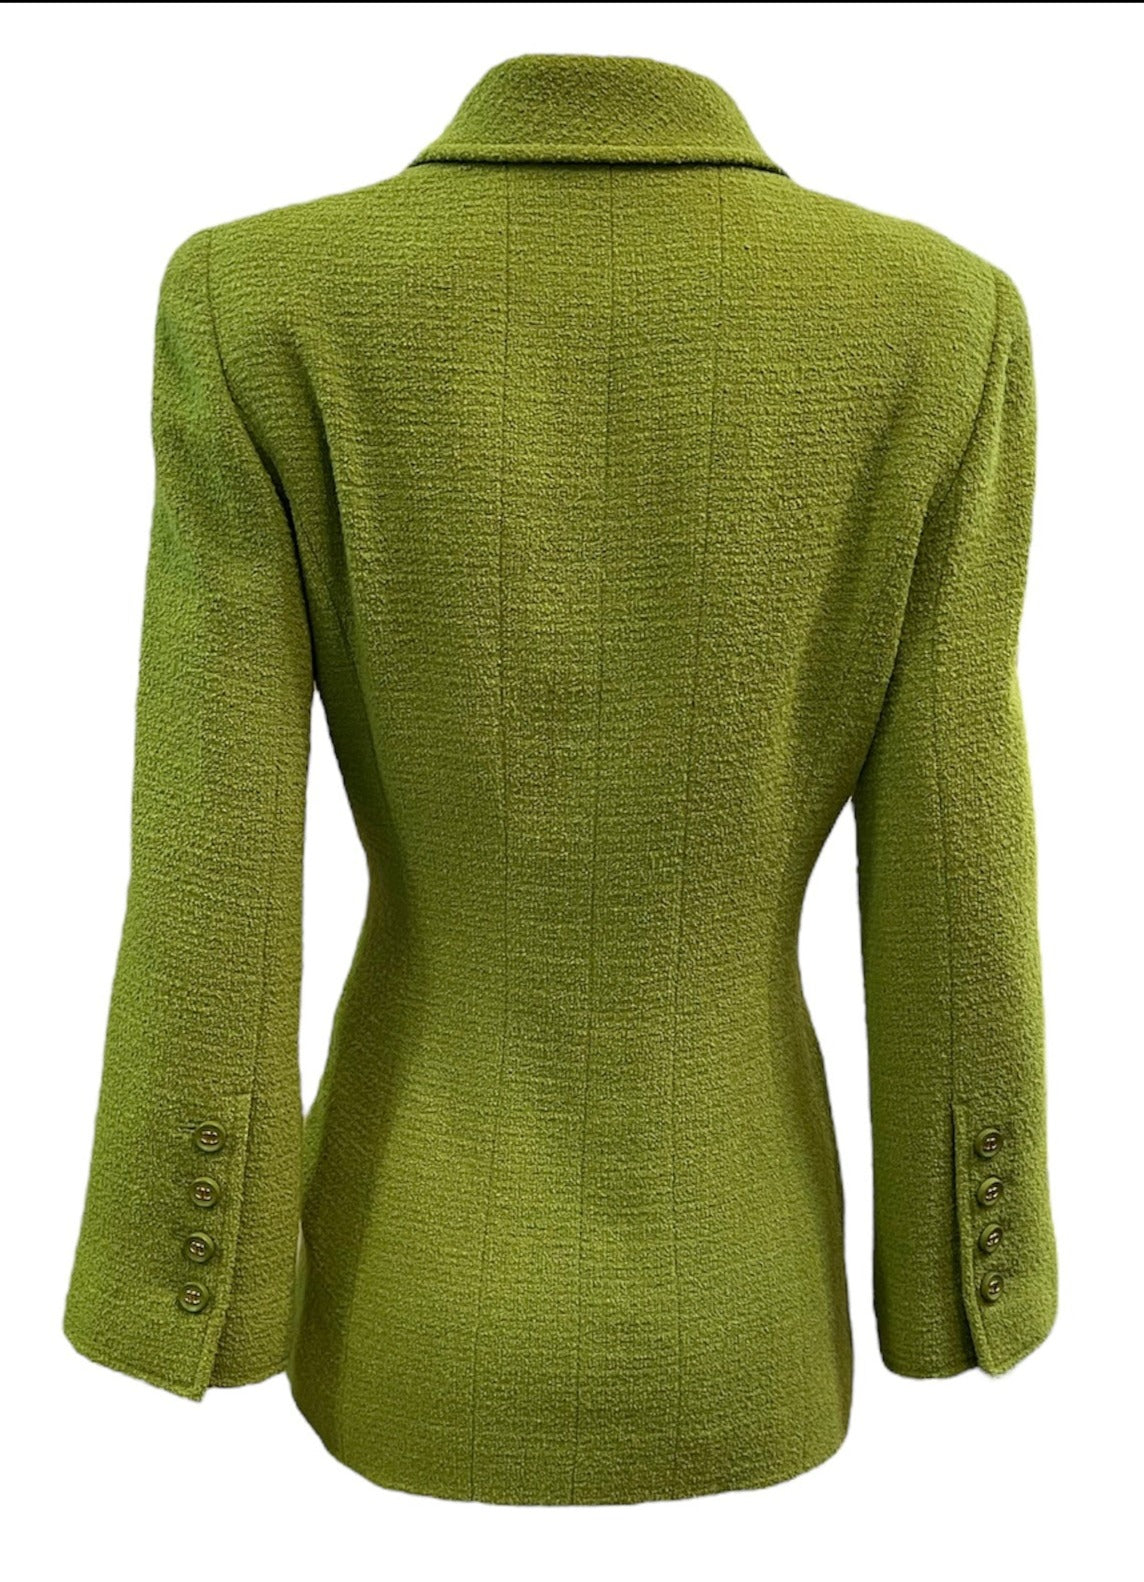   Chanel 90s Lime Green Wool Jacket with Silk Lining BACK 3 of 6